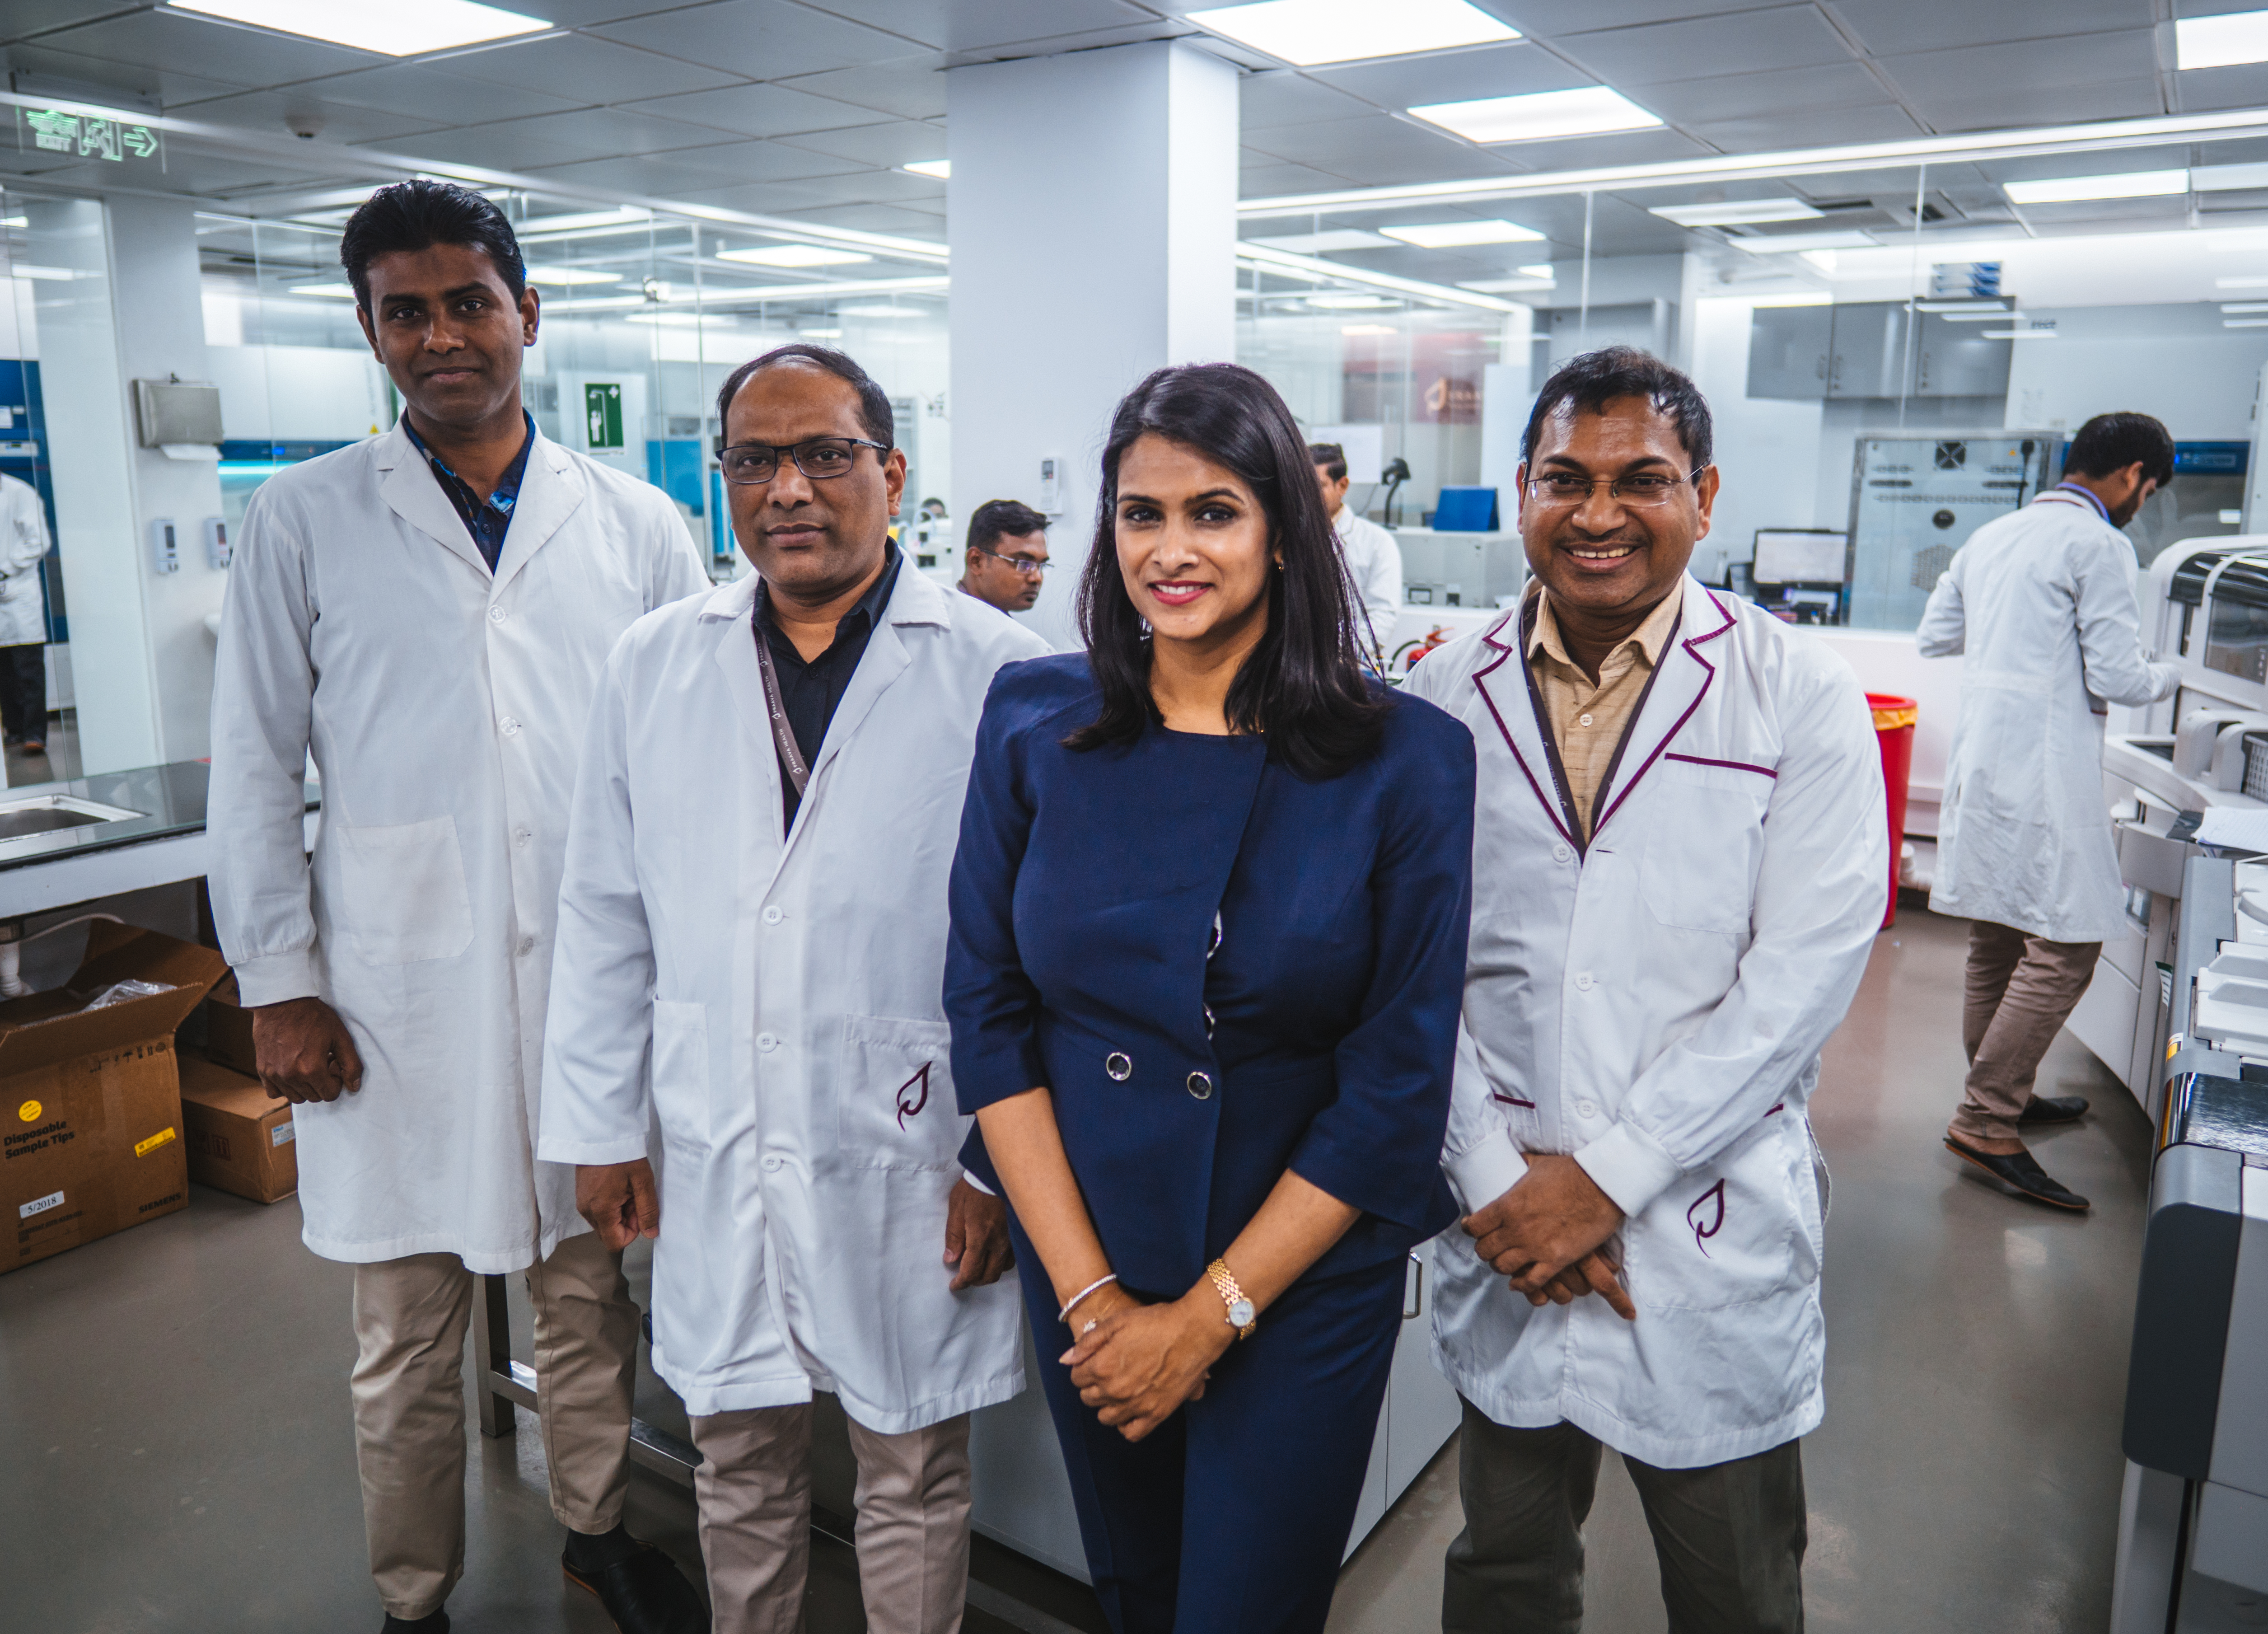 Praava Health founder and chief executive officer Sylvana Sinha (third from left) at one of the company's healthcare centers